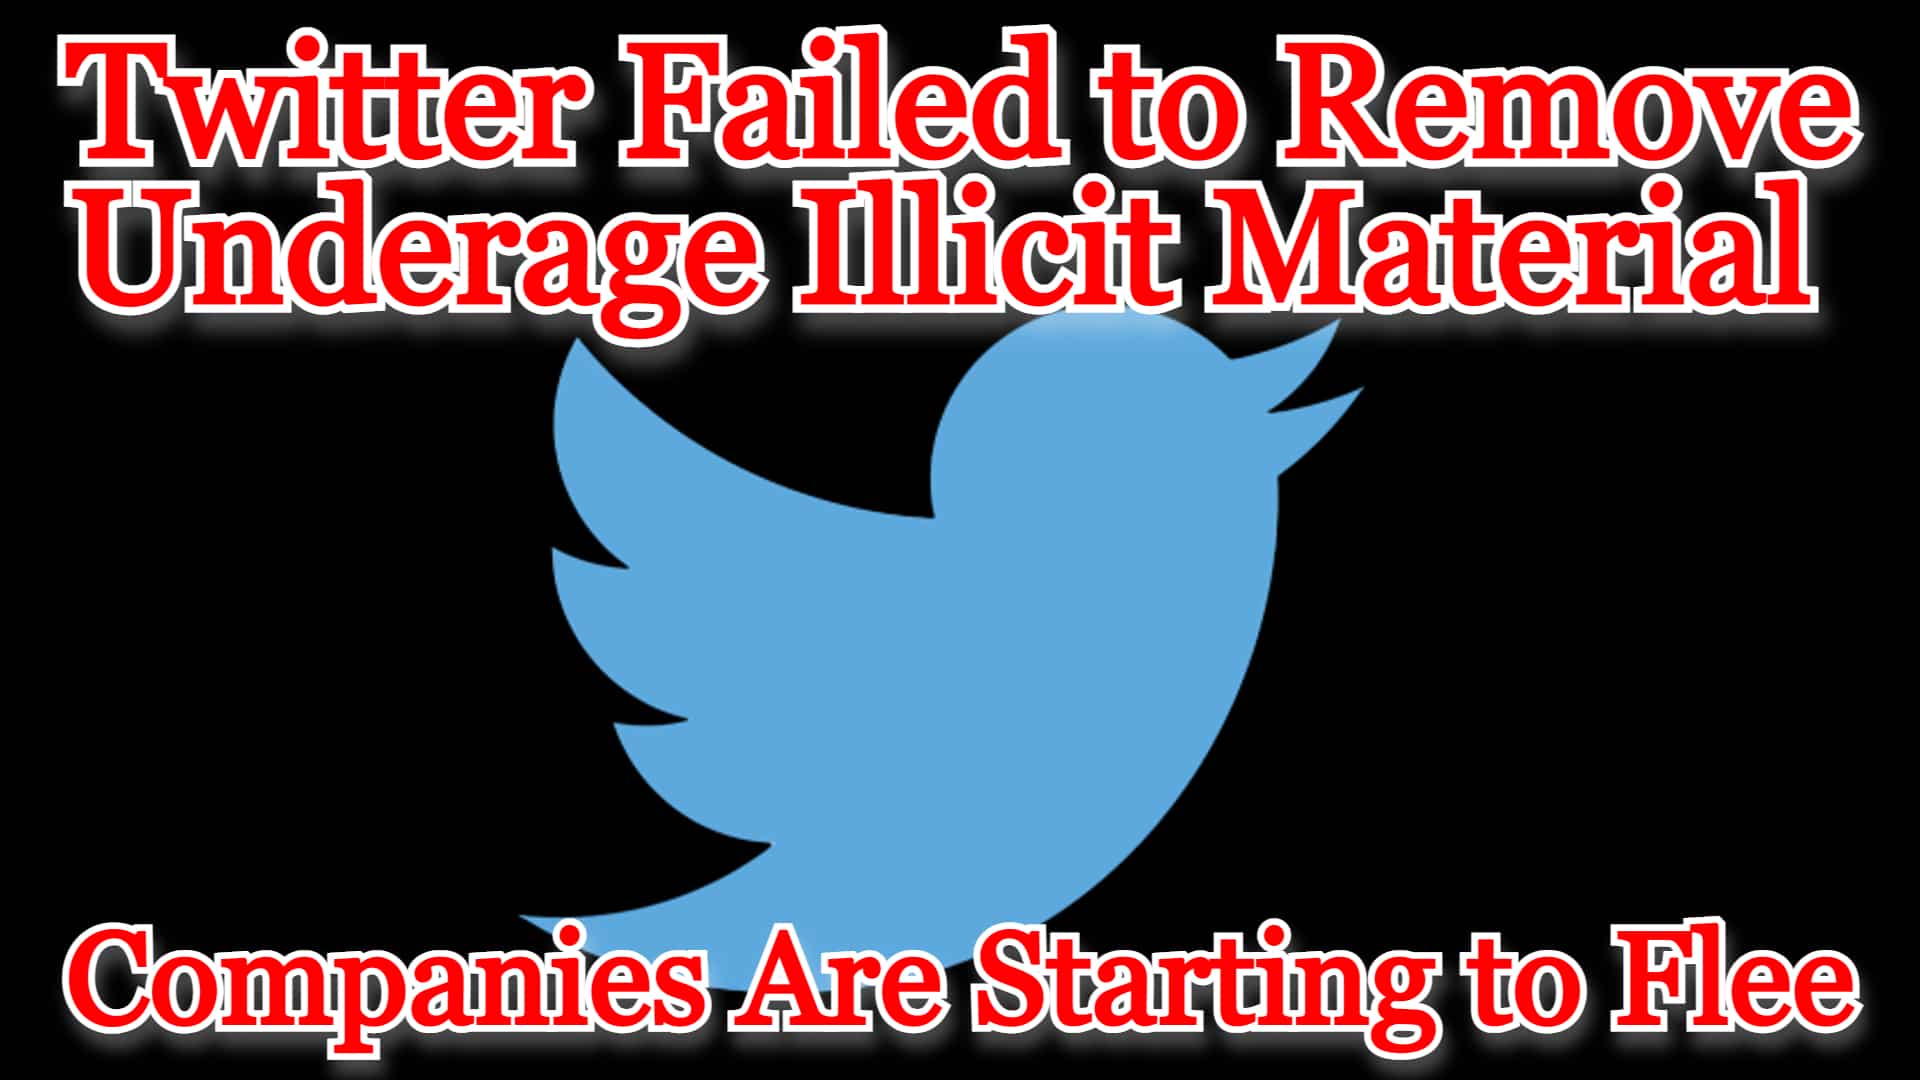 COI #331: Twitter Failed to Remove Underage Illicit Material, Now Companies Are Starting to Flee